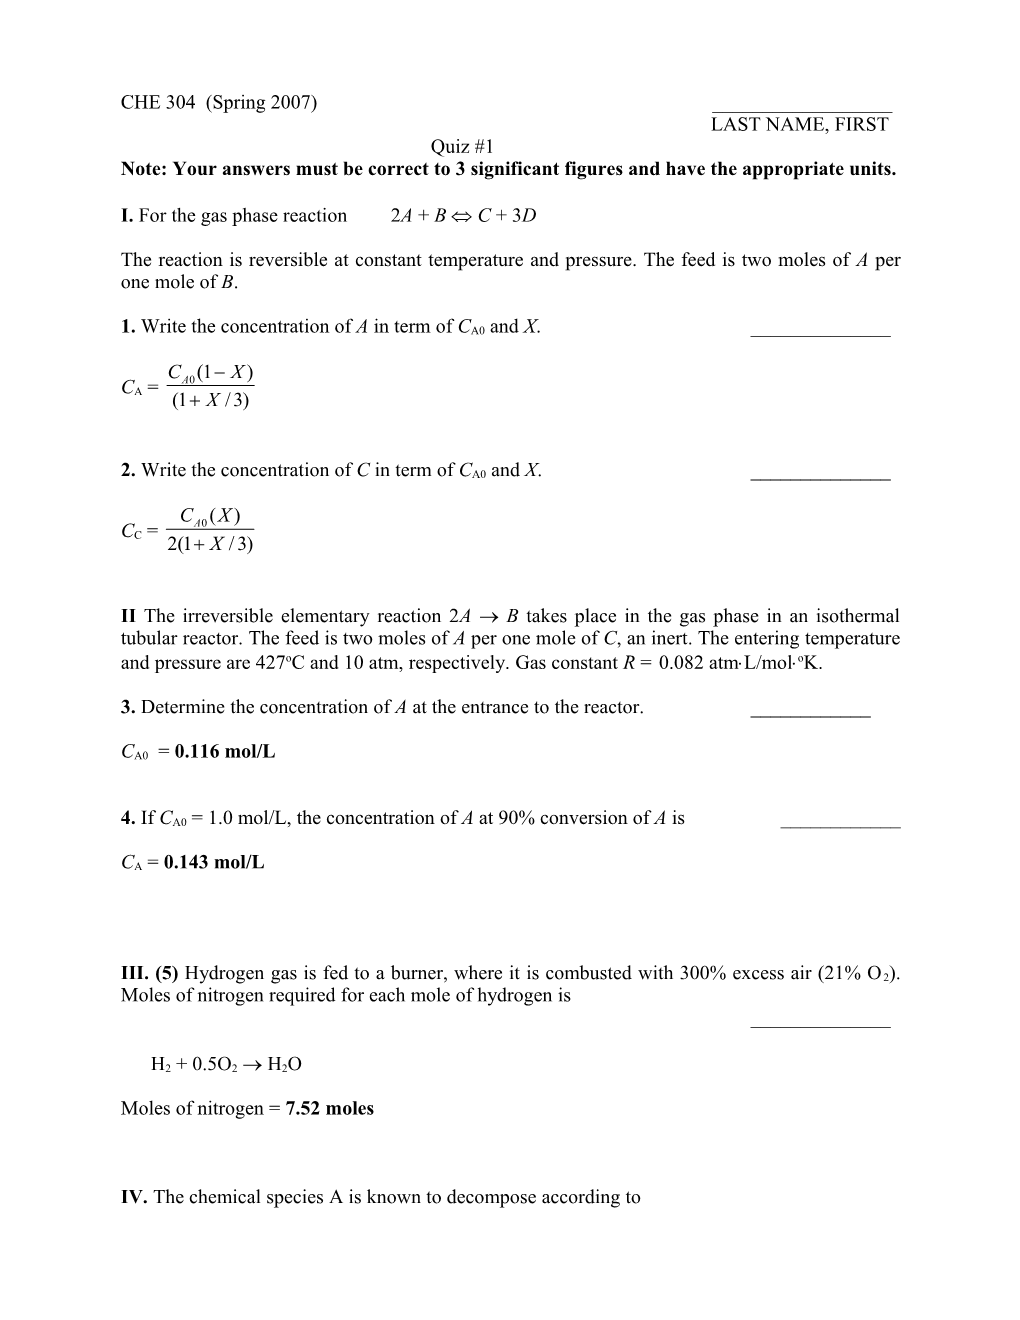 Note: Your Answers Must Be Correct to 3 Significant Figures and Have the Appropriate Units